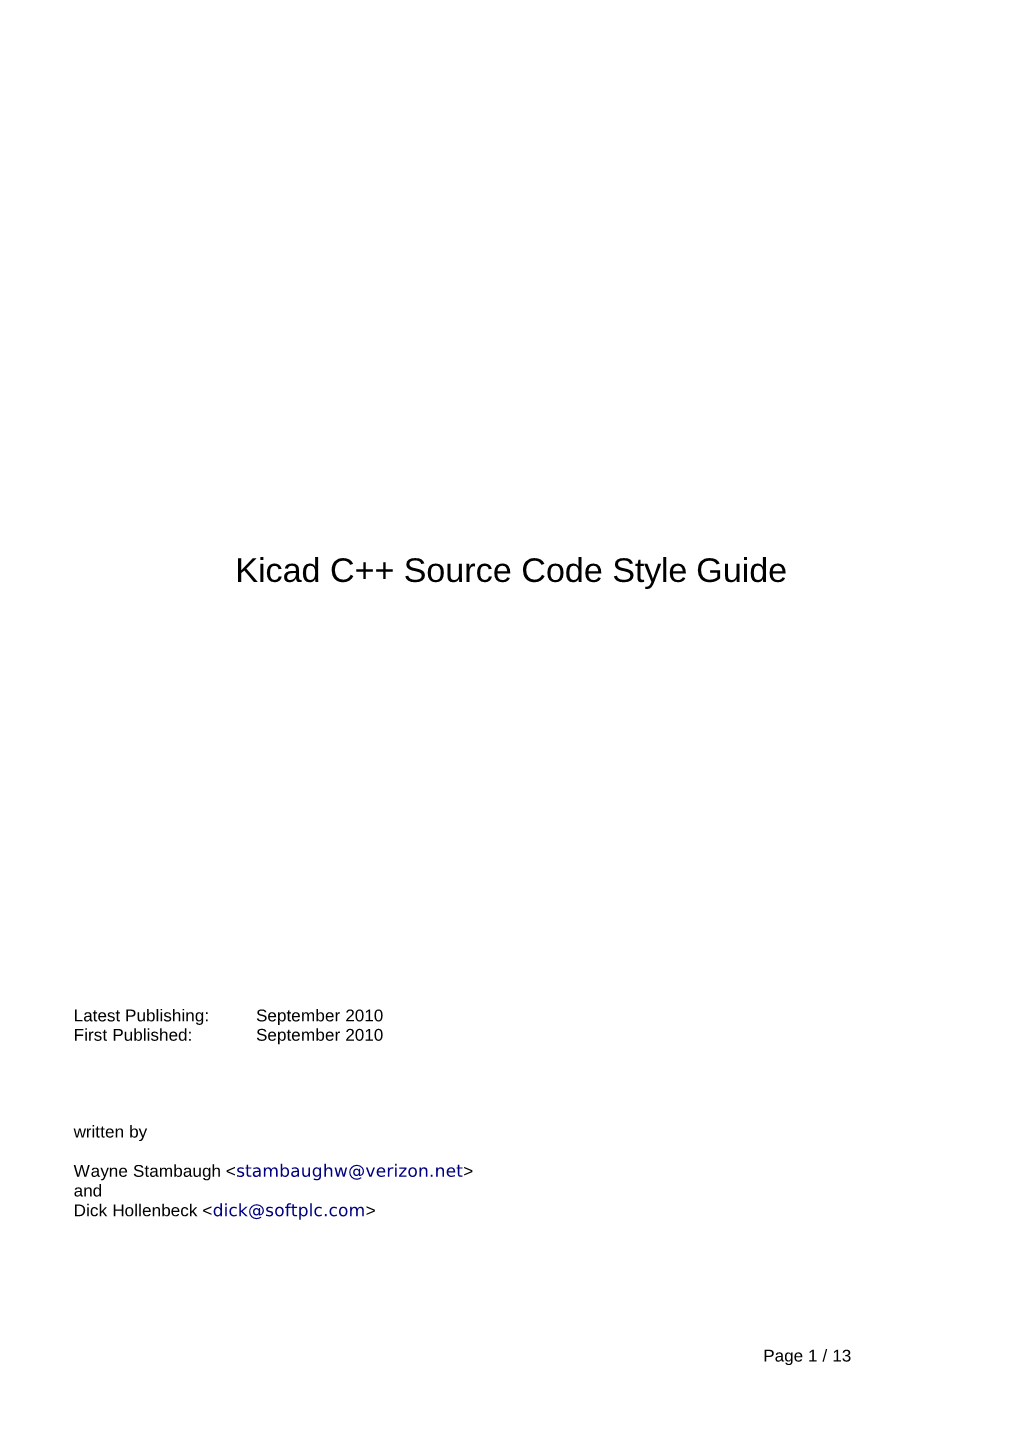 Kicad C++ Source Code Style Guide